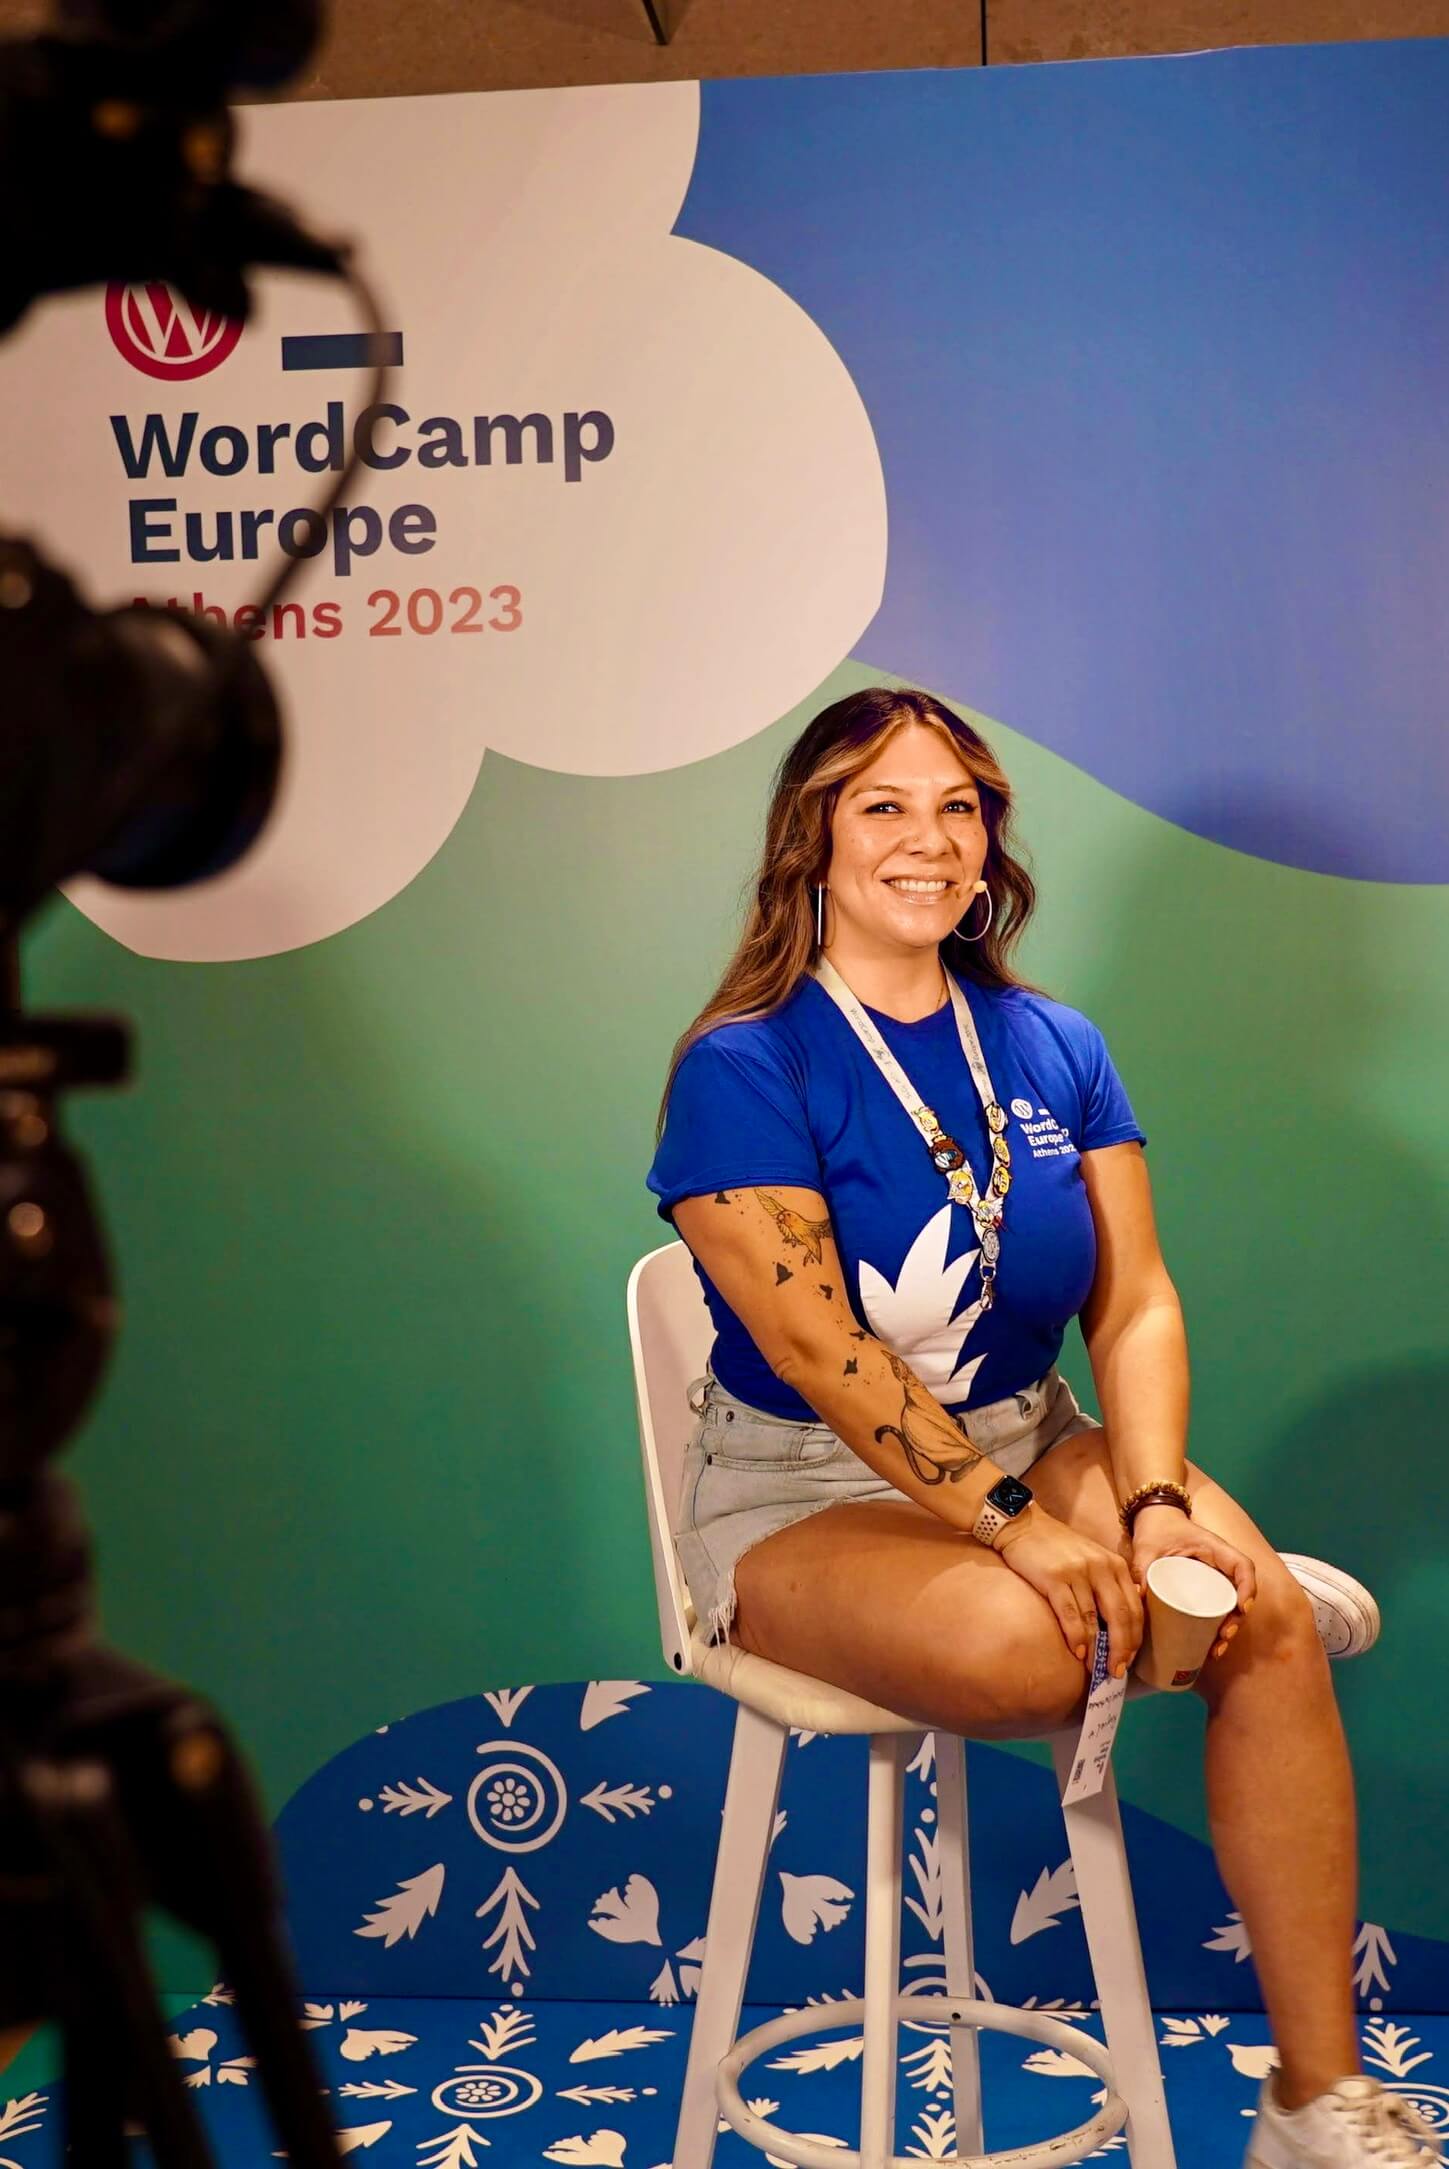 Raquel sitting on a stool in front of a camera with a head mic on